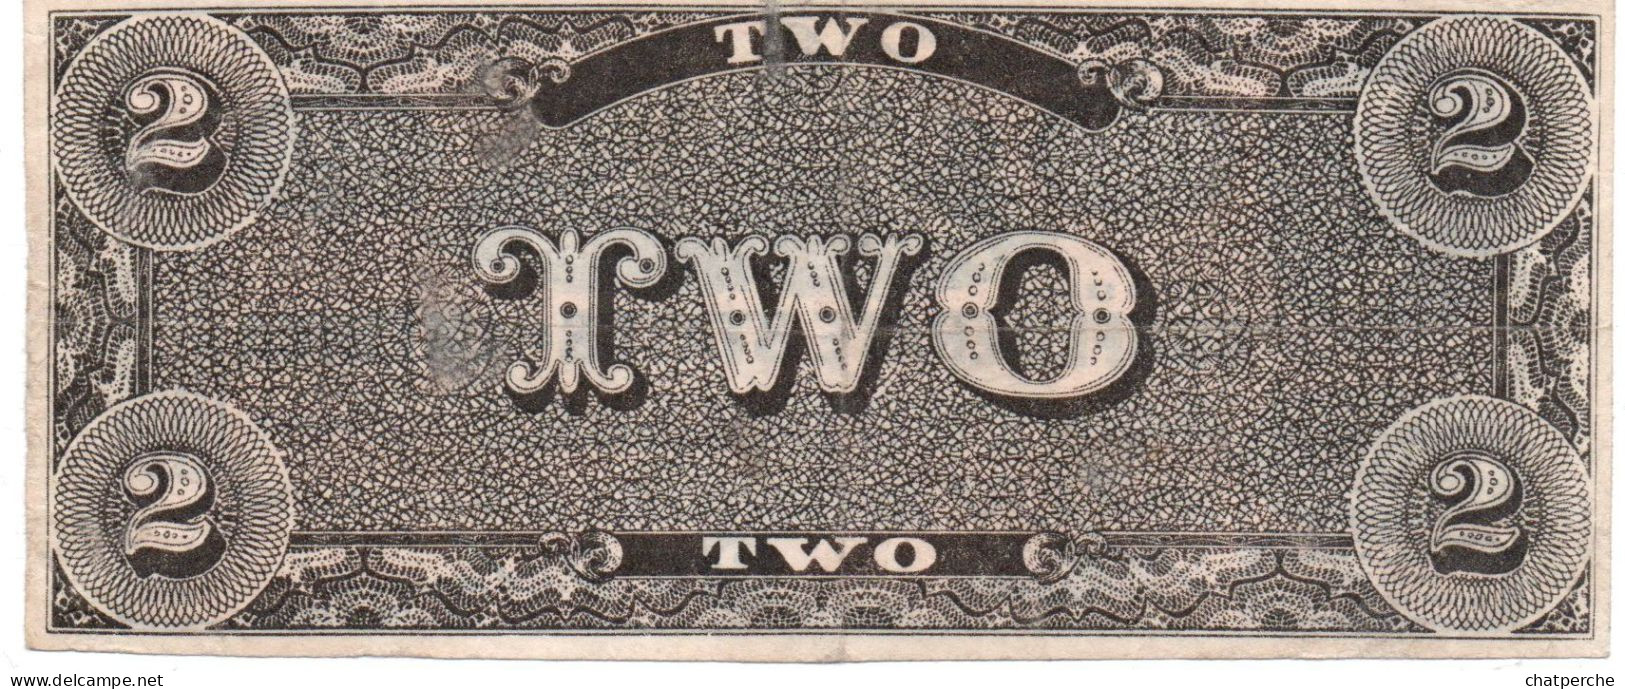 POUR COLLECTIONNEUR FAUX-BILLET FAKE 2 TWO DOLLARS THE CONFEDERATE UNITED STATES OF AMERICA - Sets & Sammlungen